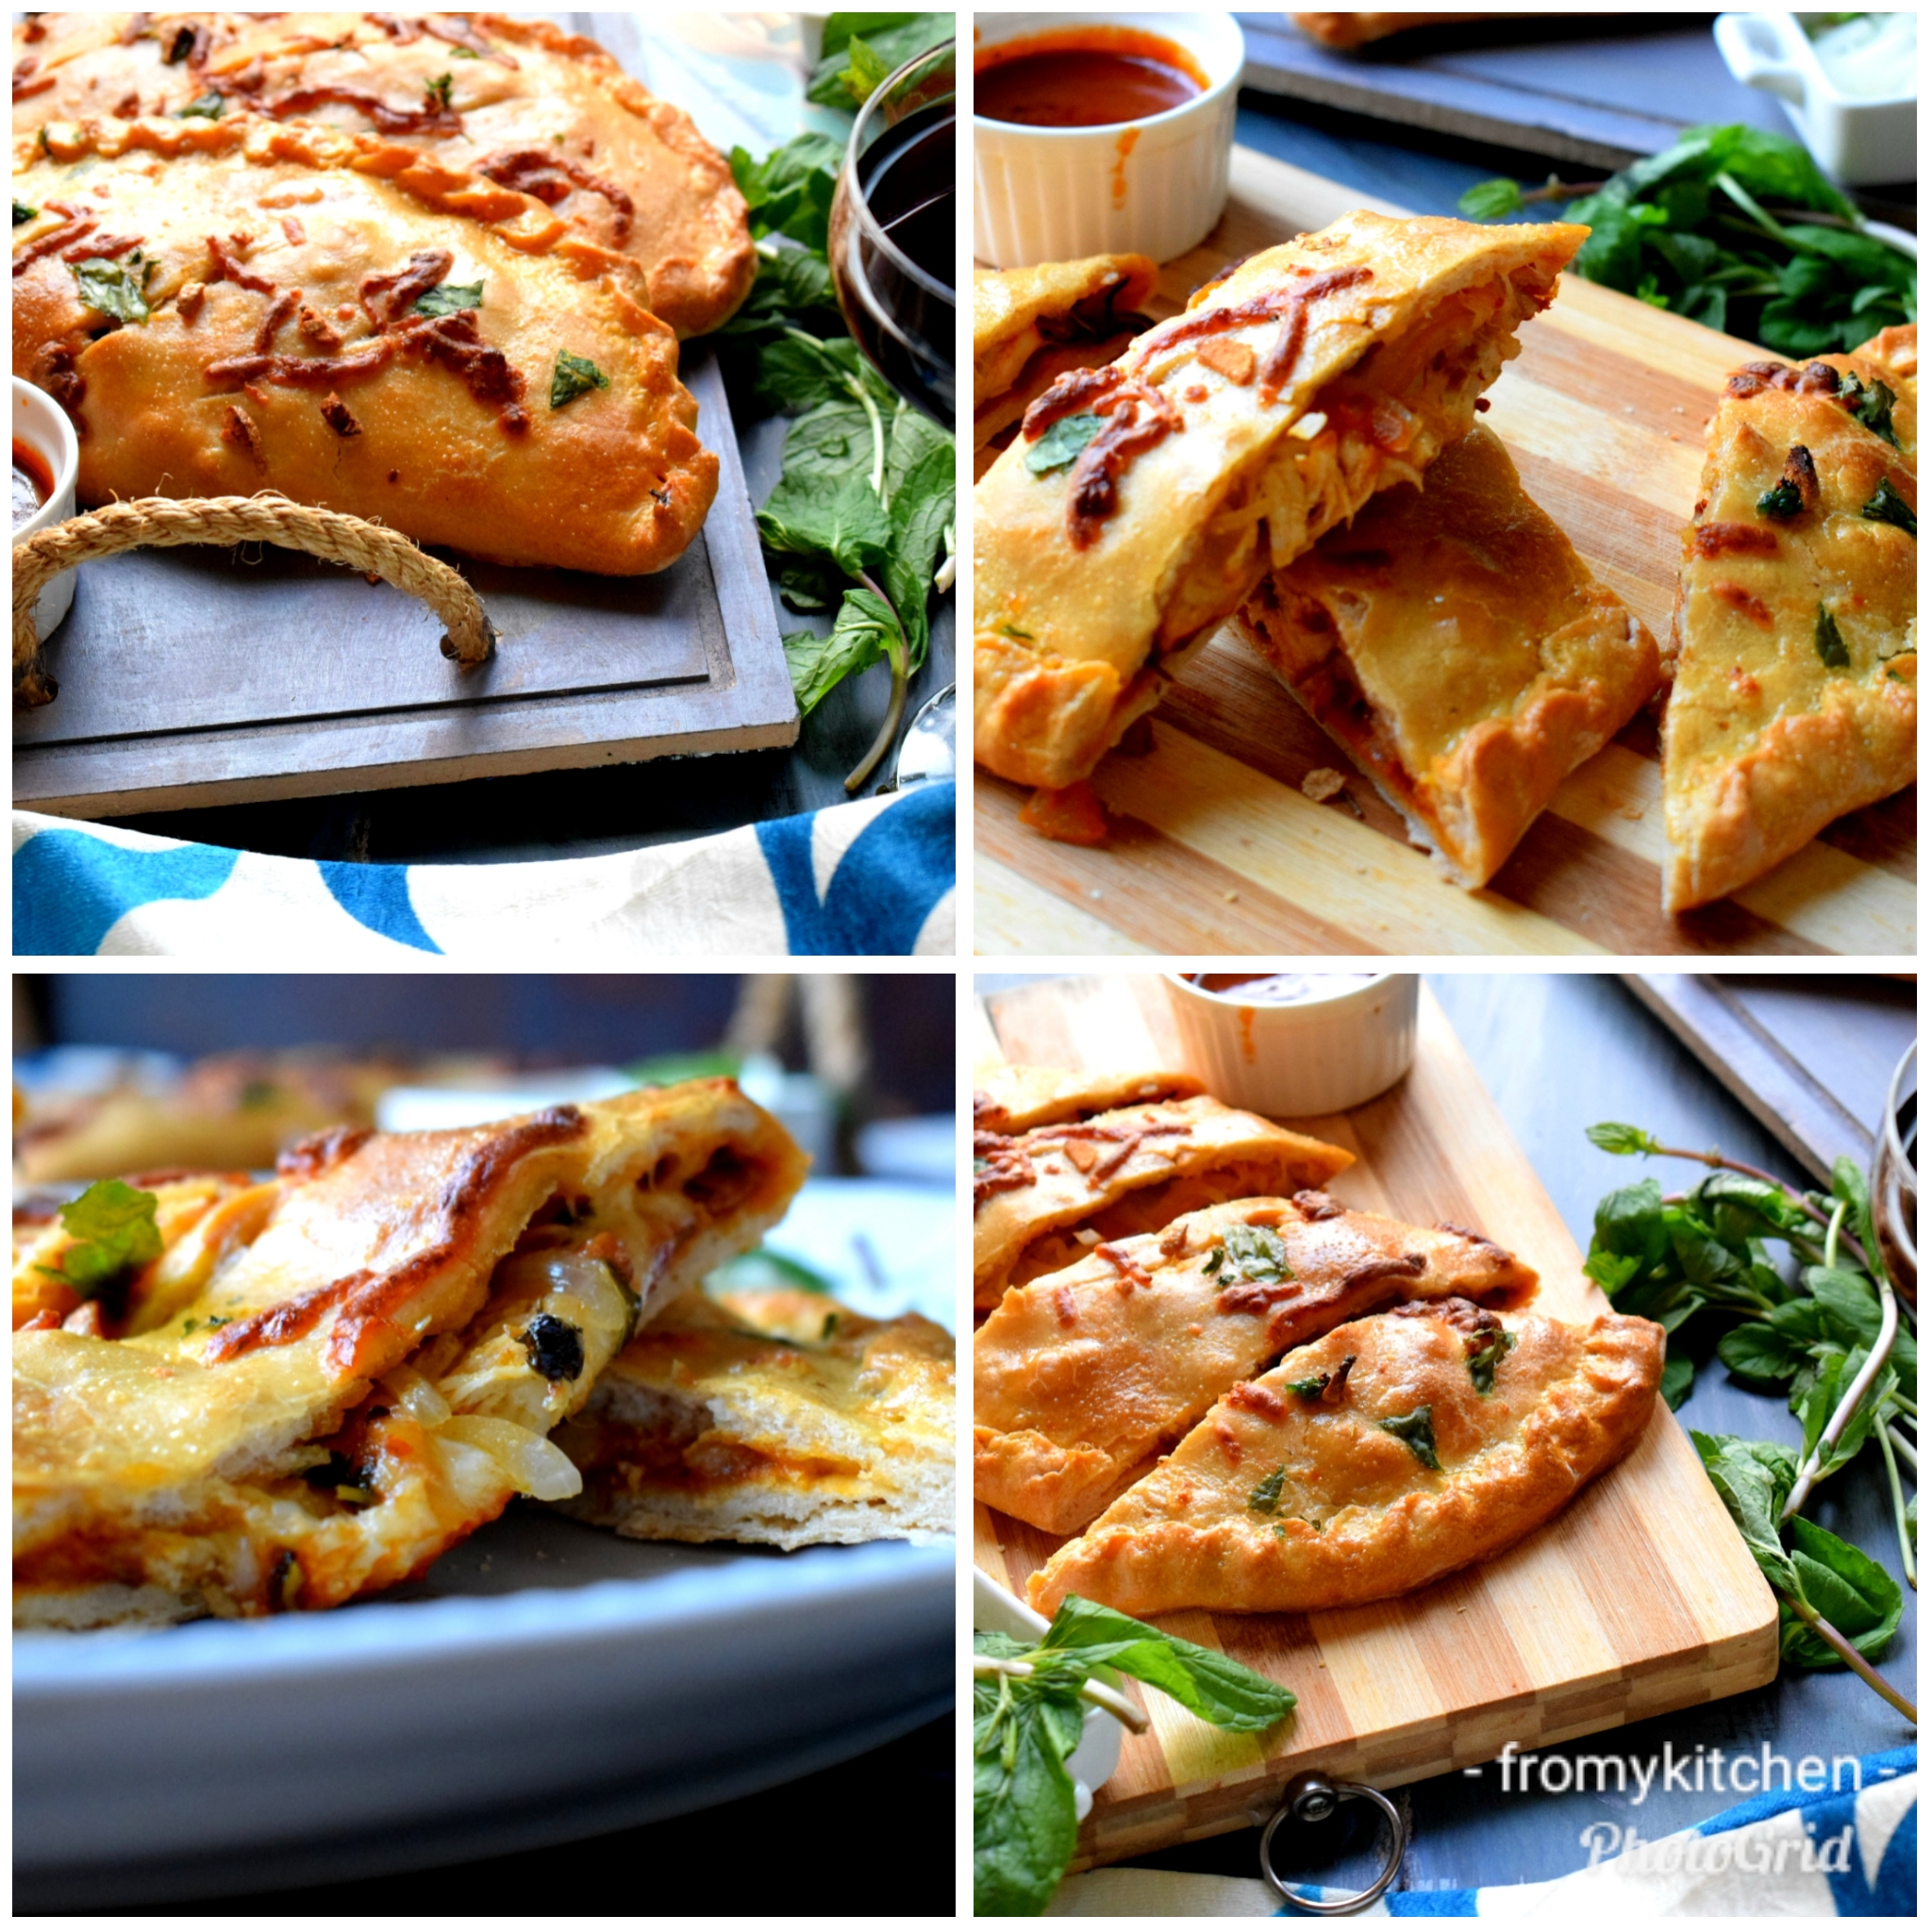 Pizza #hotpocket OR Calzone? #fyp #fy #food #lunch #recipe #flavorgod